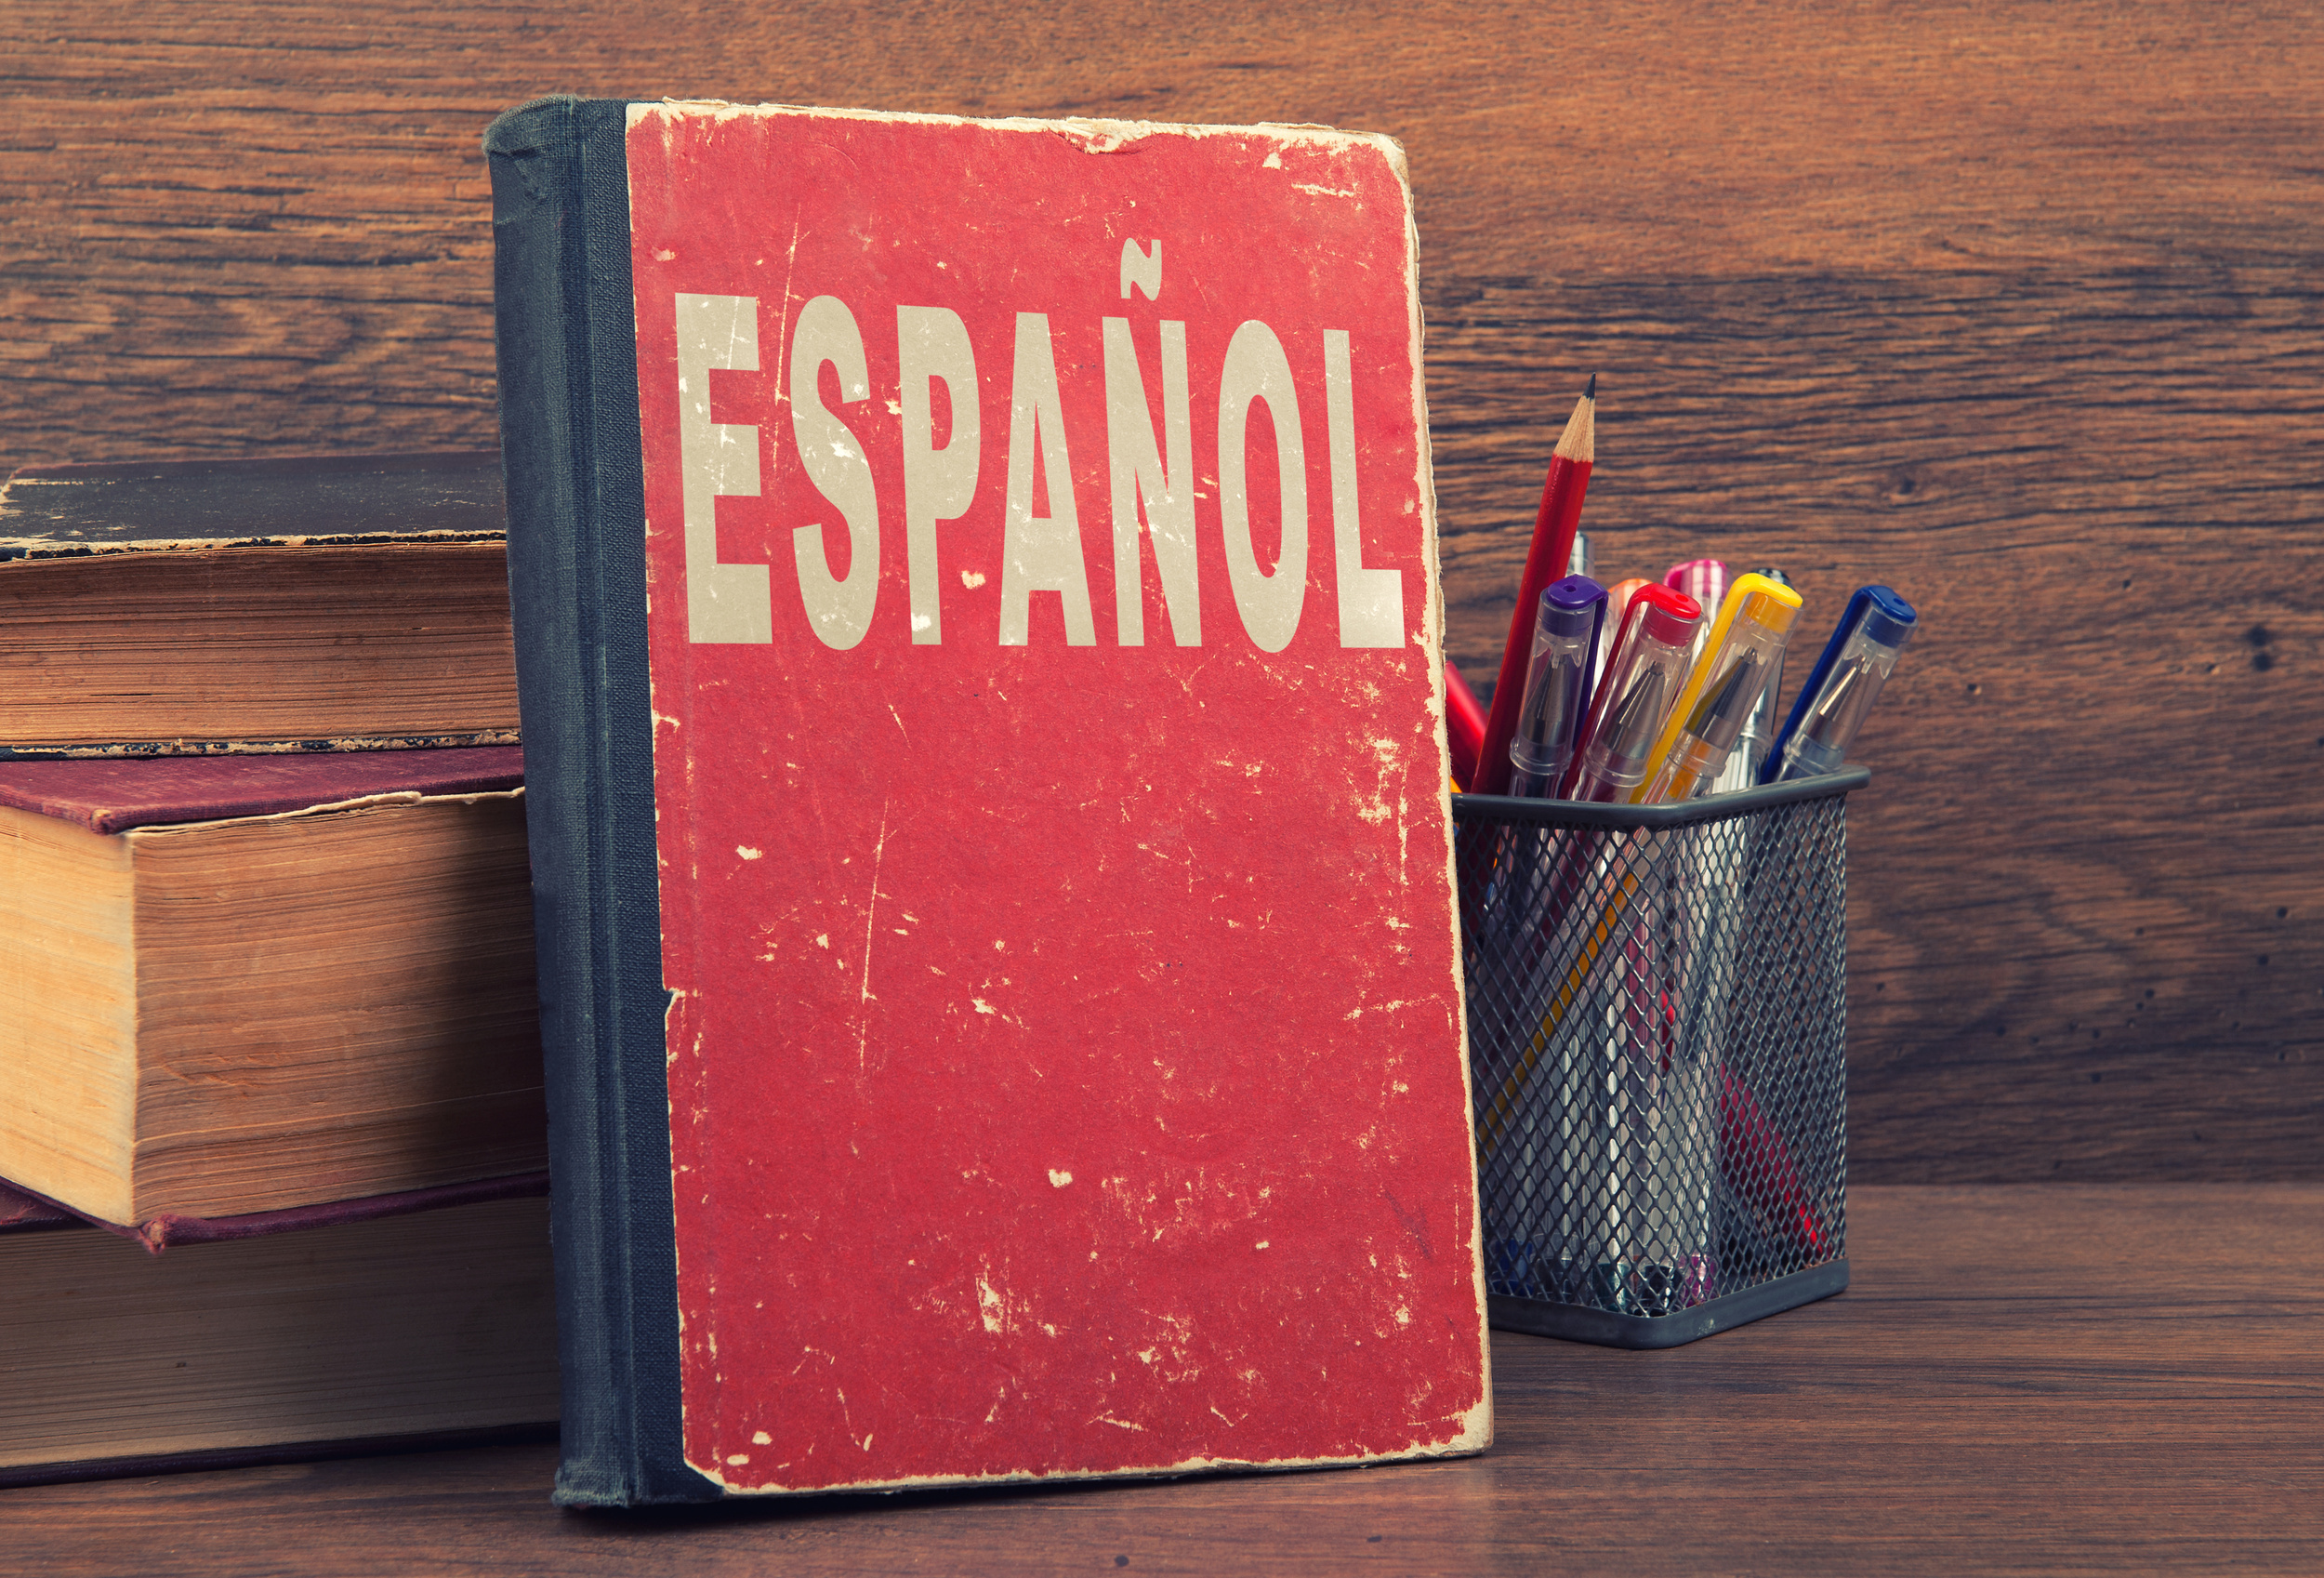 <p>Spanish is easy for English speakers to learn for a variety of reasons. The two languages share an alphabet, many words, and similar sentence structures. Lots of people across the globe speak Spanish, too, so it’s a great choice for a foreign language. </p><p>You may also like: <a href='https://www.yardbarker.com/lifestyle/articles/our_24_favorite_recipes_featuring_store_bought_shortcuts/s1__40244513'>Our 24 favorite recipes featuring store-bought shortcuts</a></p>